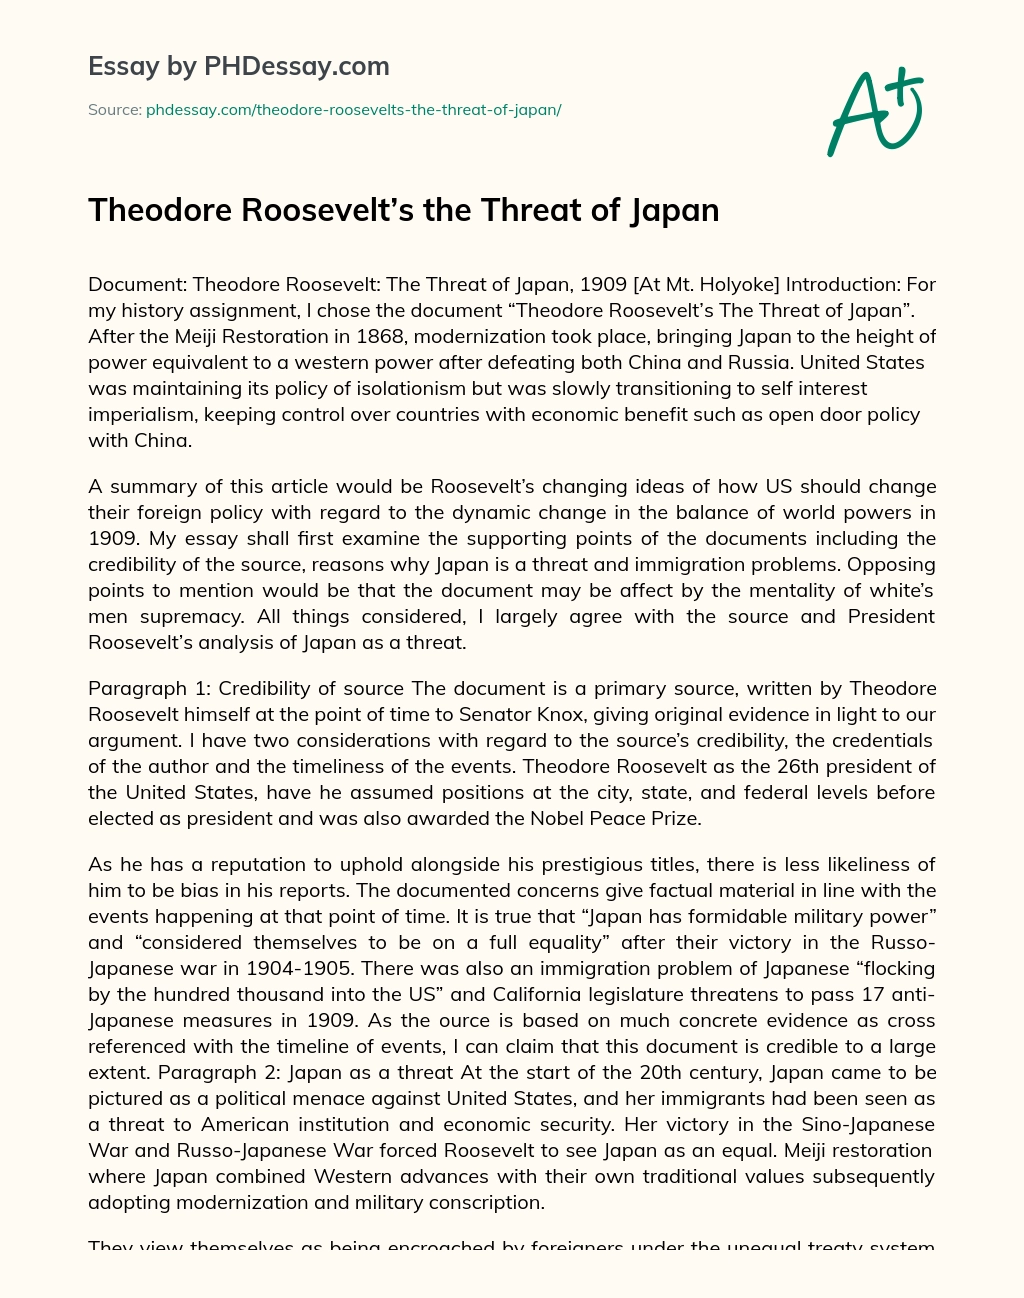 Theodore Roosevelt’s the Threat of Japan essay